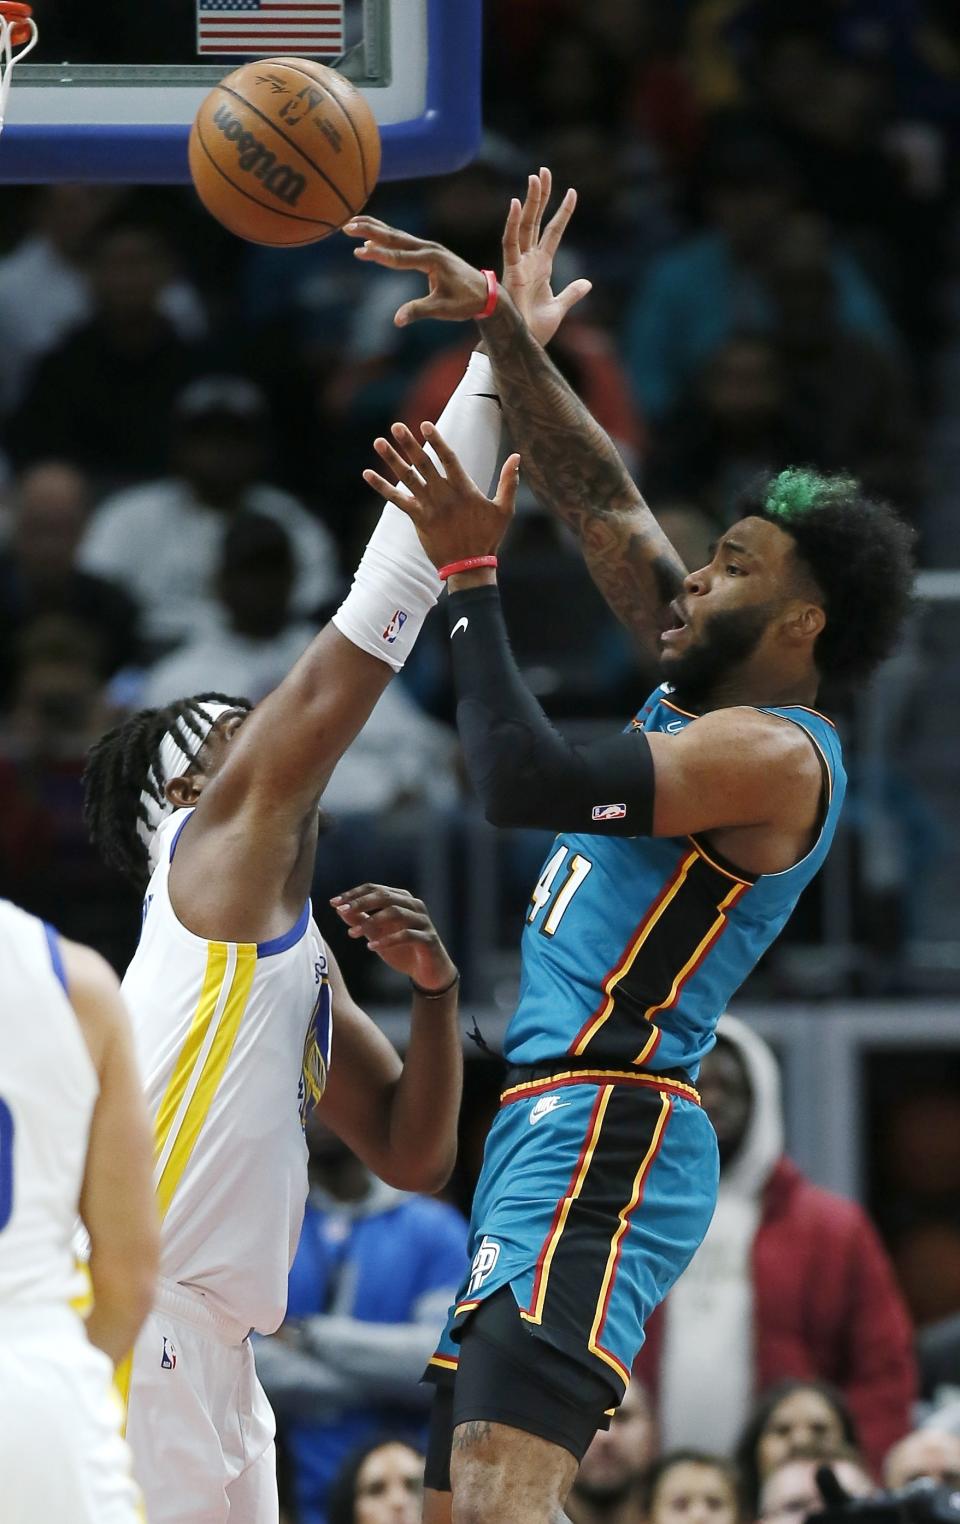 Detroit Pistons forward Saddiq Bey (41) passes against Golden State Warriors center Kevon Looney during the first half of an NBA basketball game Sunday, Oct. 30, 2022, in Detroit. (AP Photo/Duane Burleson)